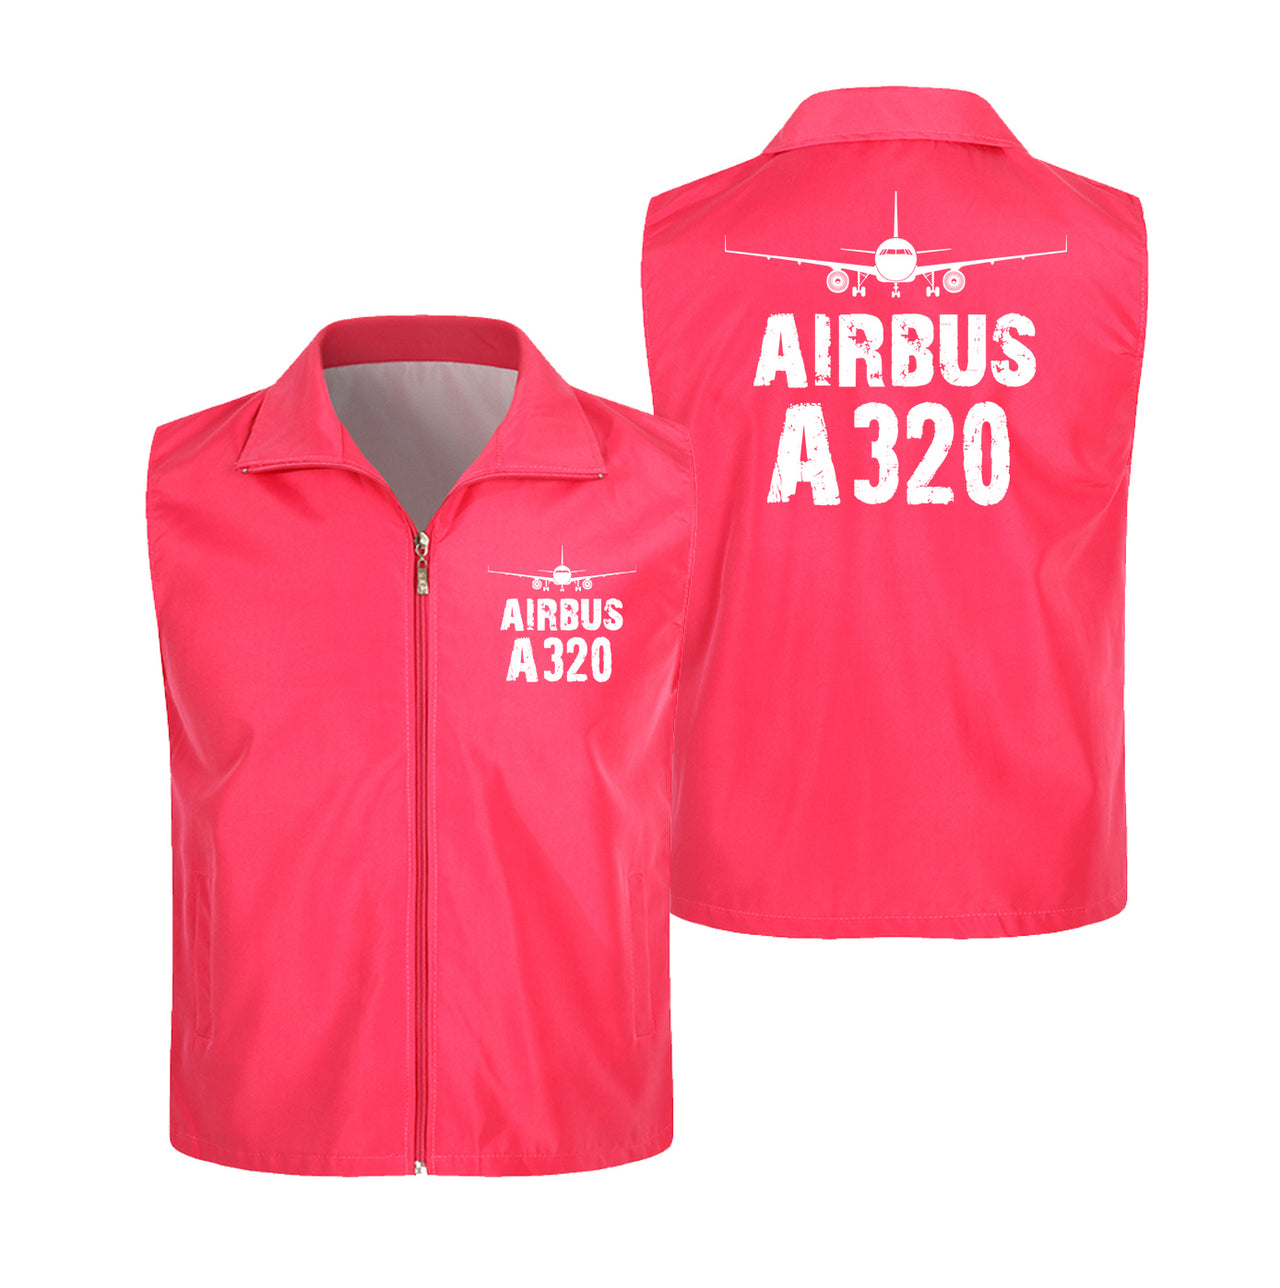 Airbus A320 & Plane Designed Thin Style Vests